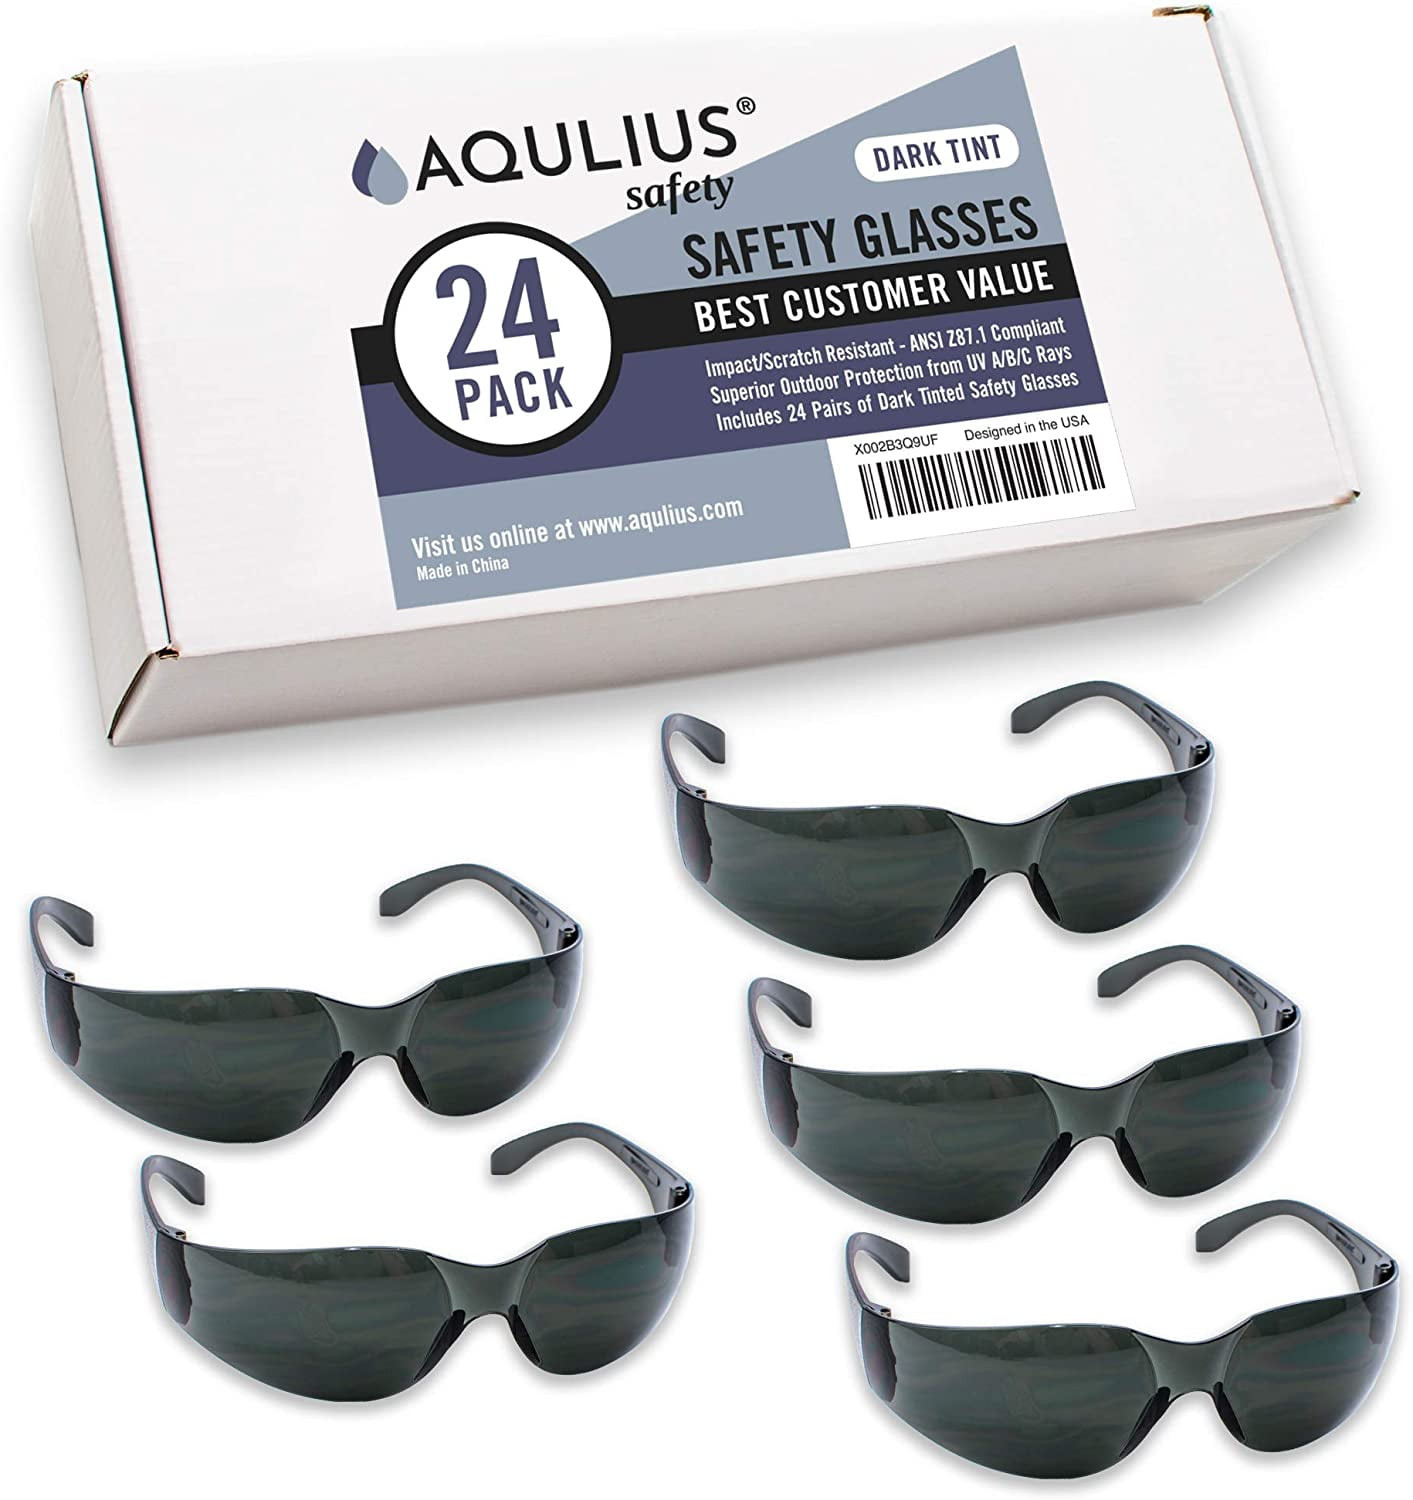 Aqulius 24 Pack Tinted Safety Glasses for Construction, Shooting & Lab  Work, UV Resistant, Scratch Resistant 